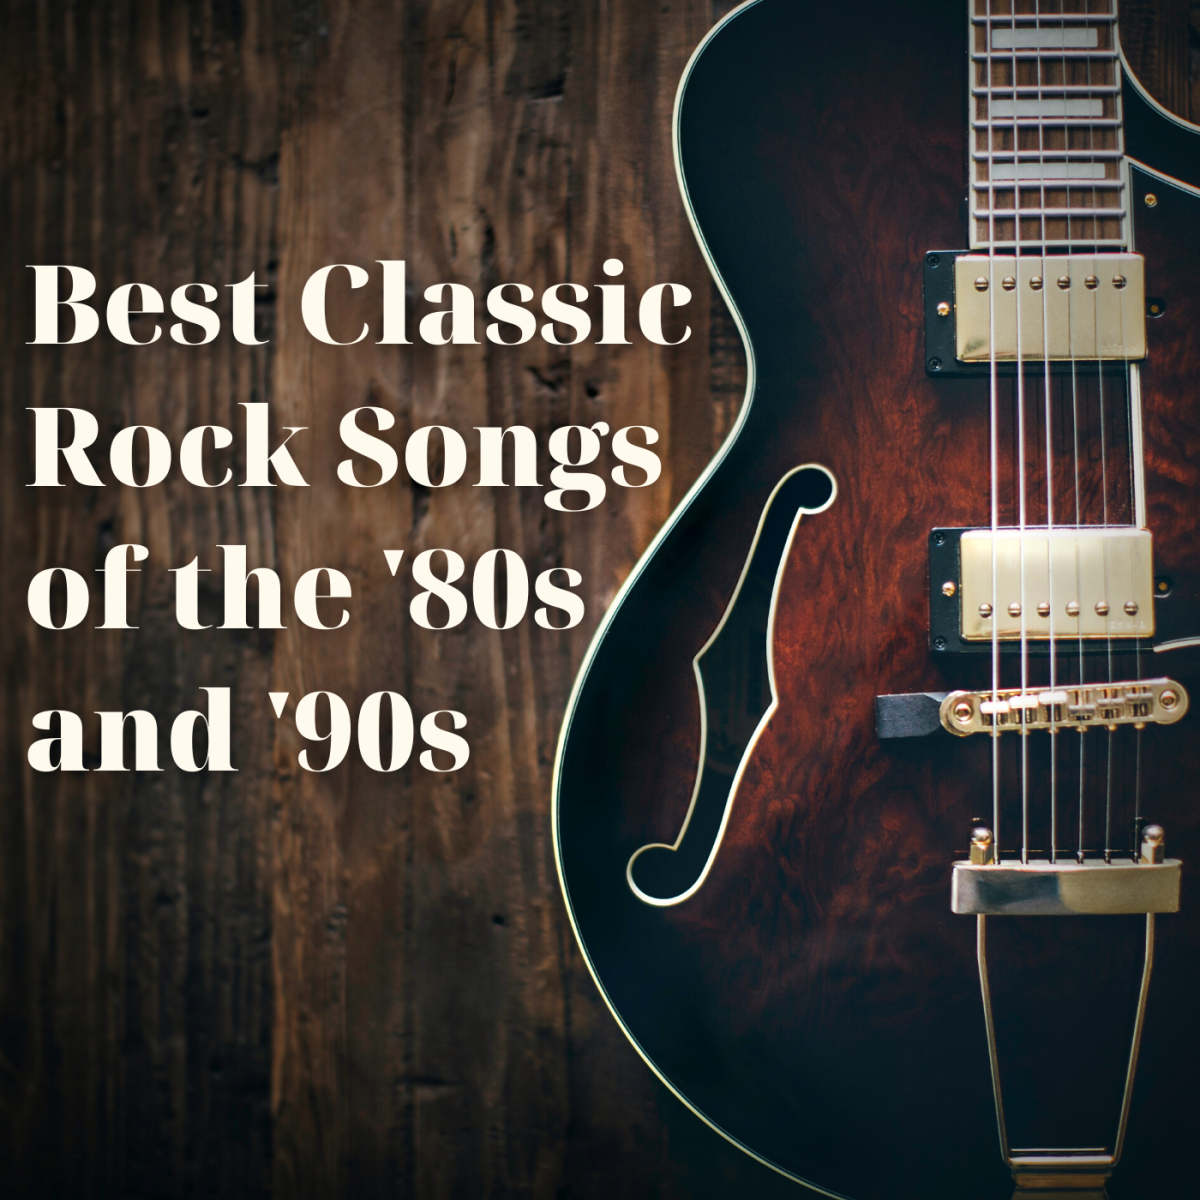 100 Best Classic Rock Songs of the ‘80s and ‘90s